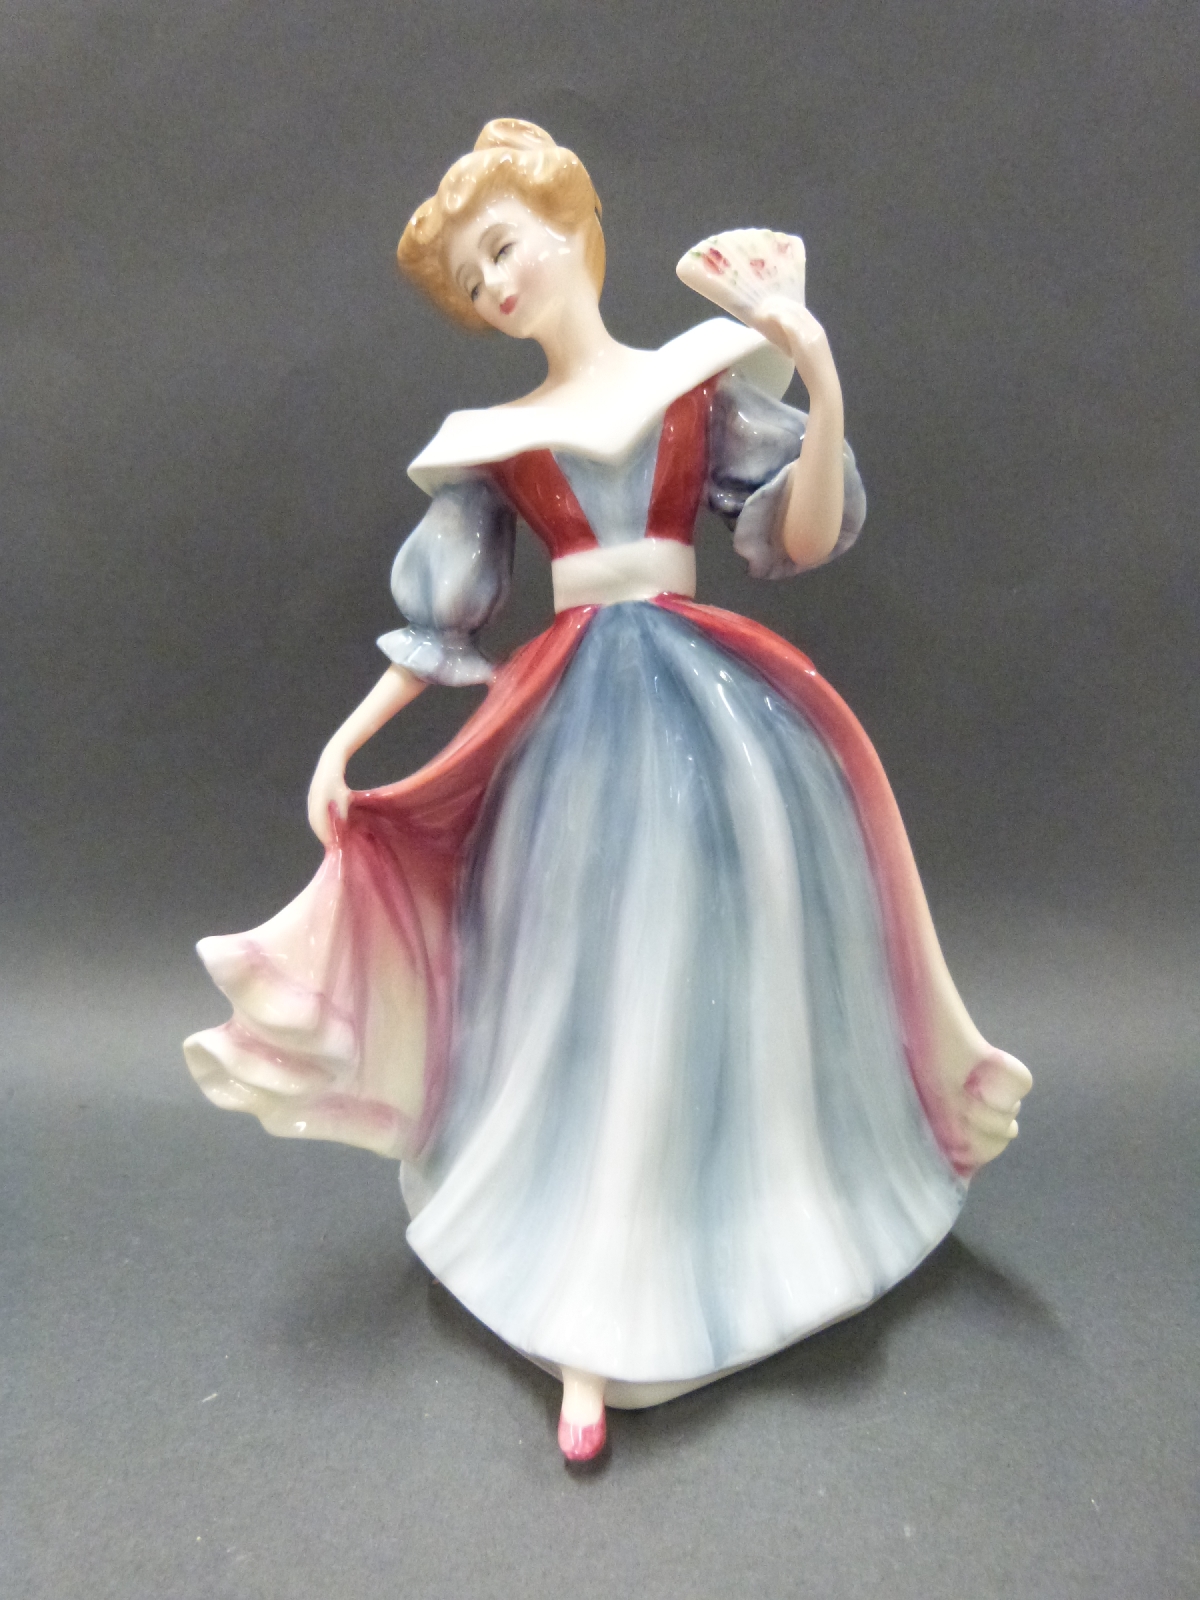 Royal Doulton figurine Amy, signed by the artist, signed Continental majolica, - Image 2 of 5